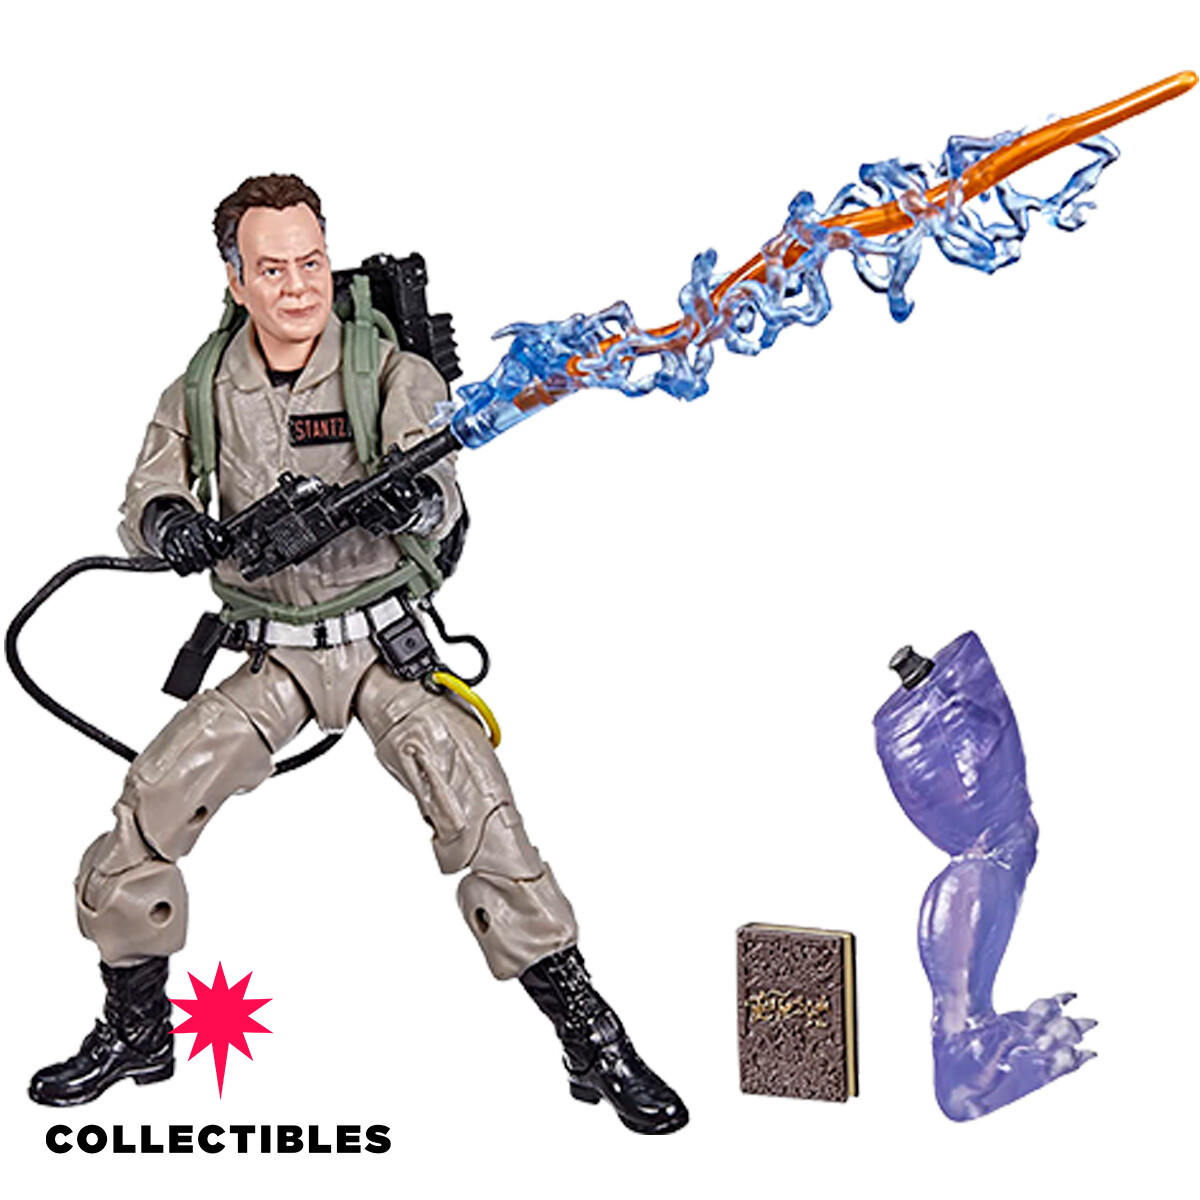 GHOSTBUSTER AFTER LIFE PLASMA SERIES - RAY STANTZ 2021 